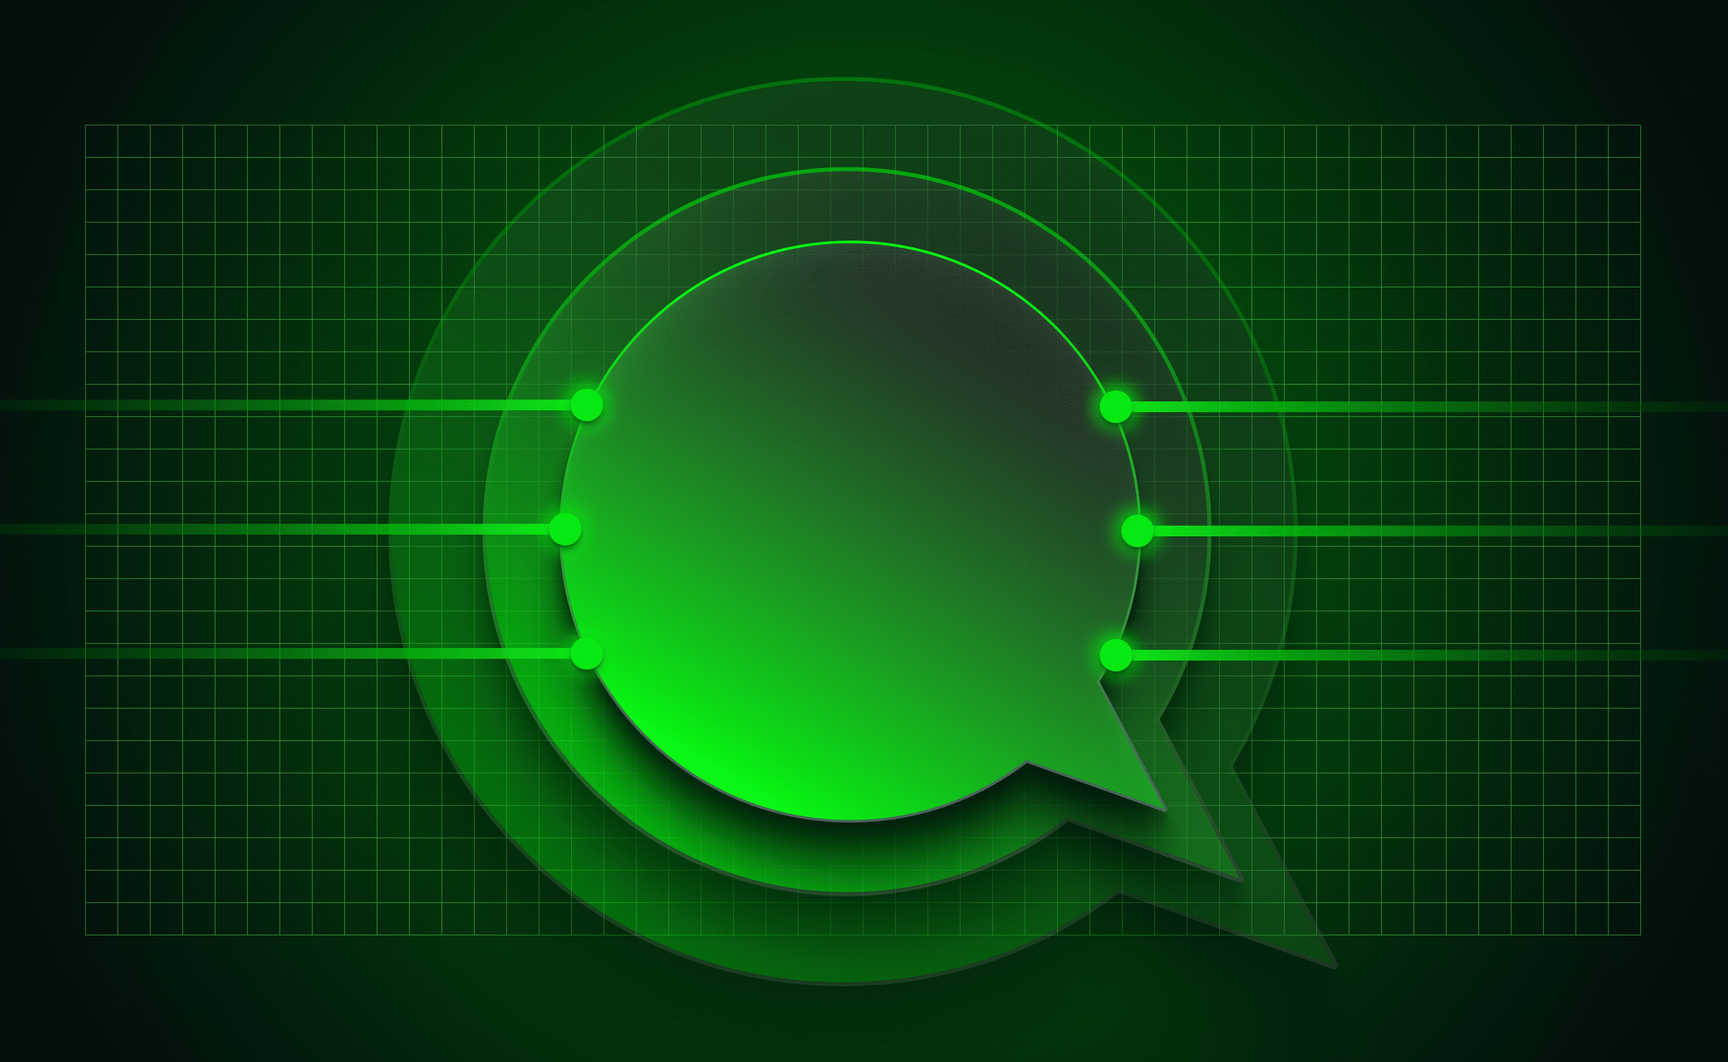 How to build a chat app like WhatsApp